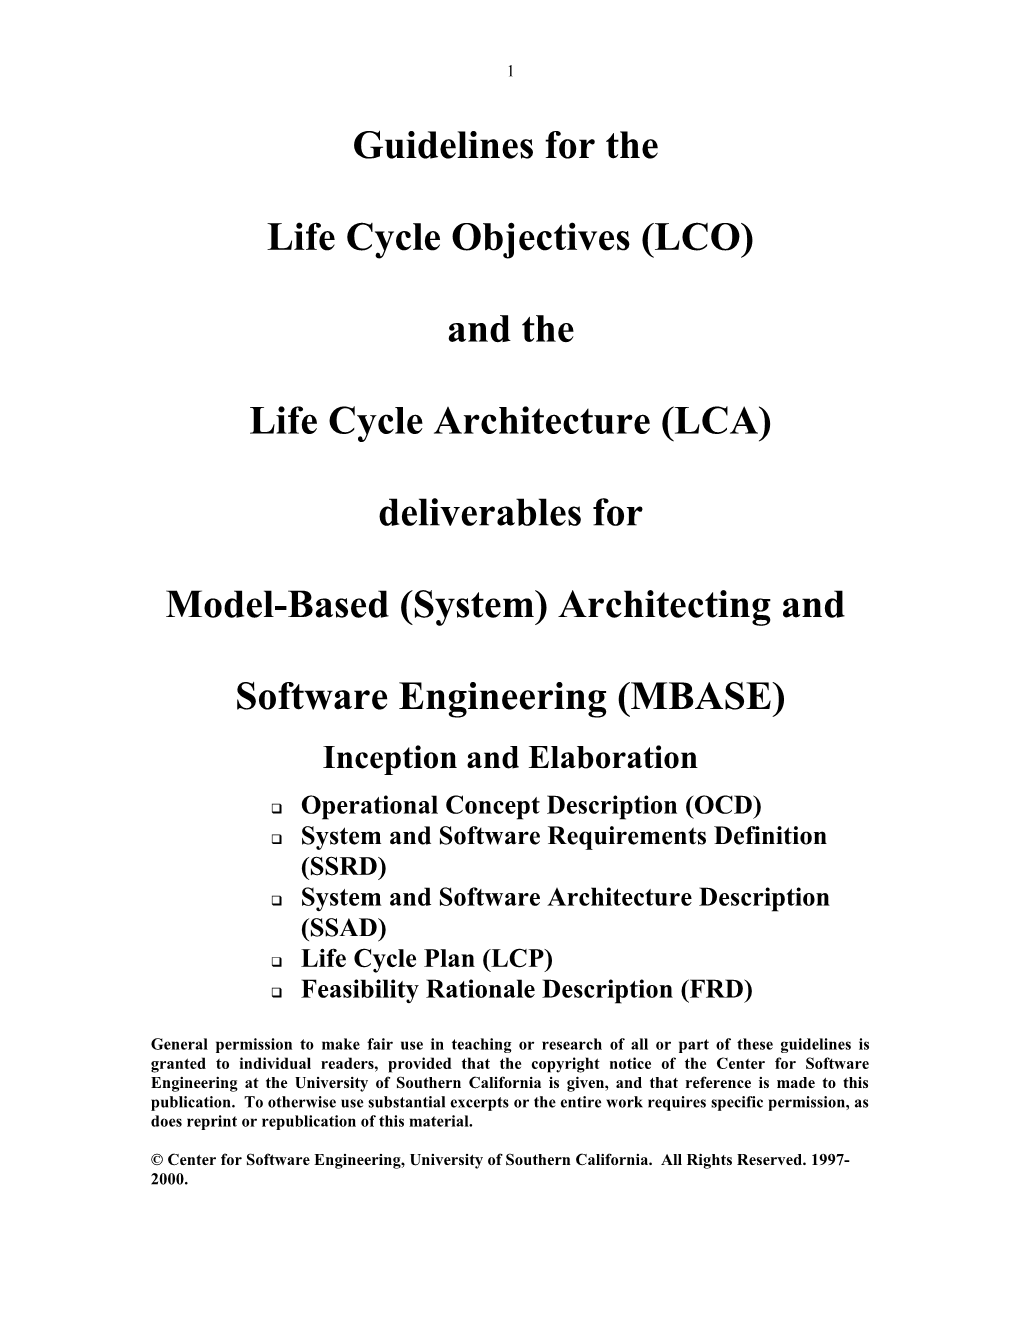 Guidelines for the LCO/LCA Deliverables